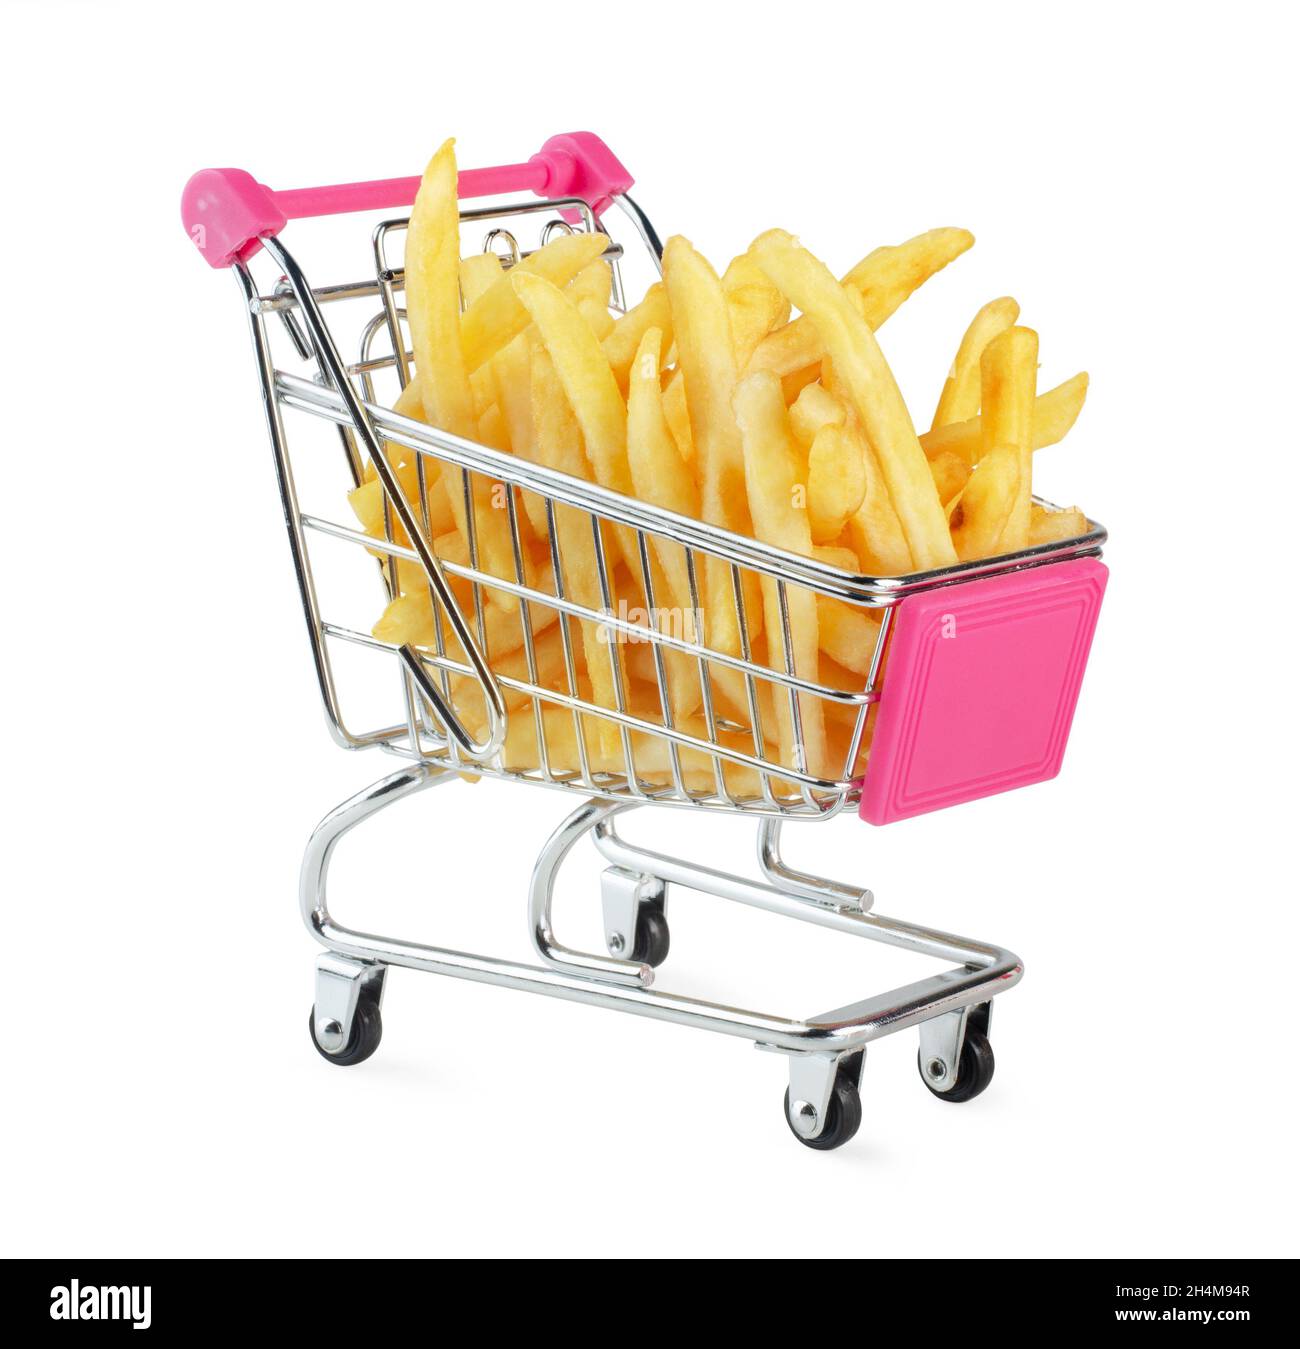 Shopping cart full of french fries on white isolated background Stock Photo